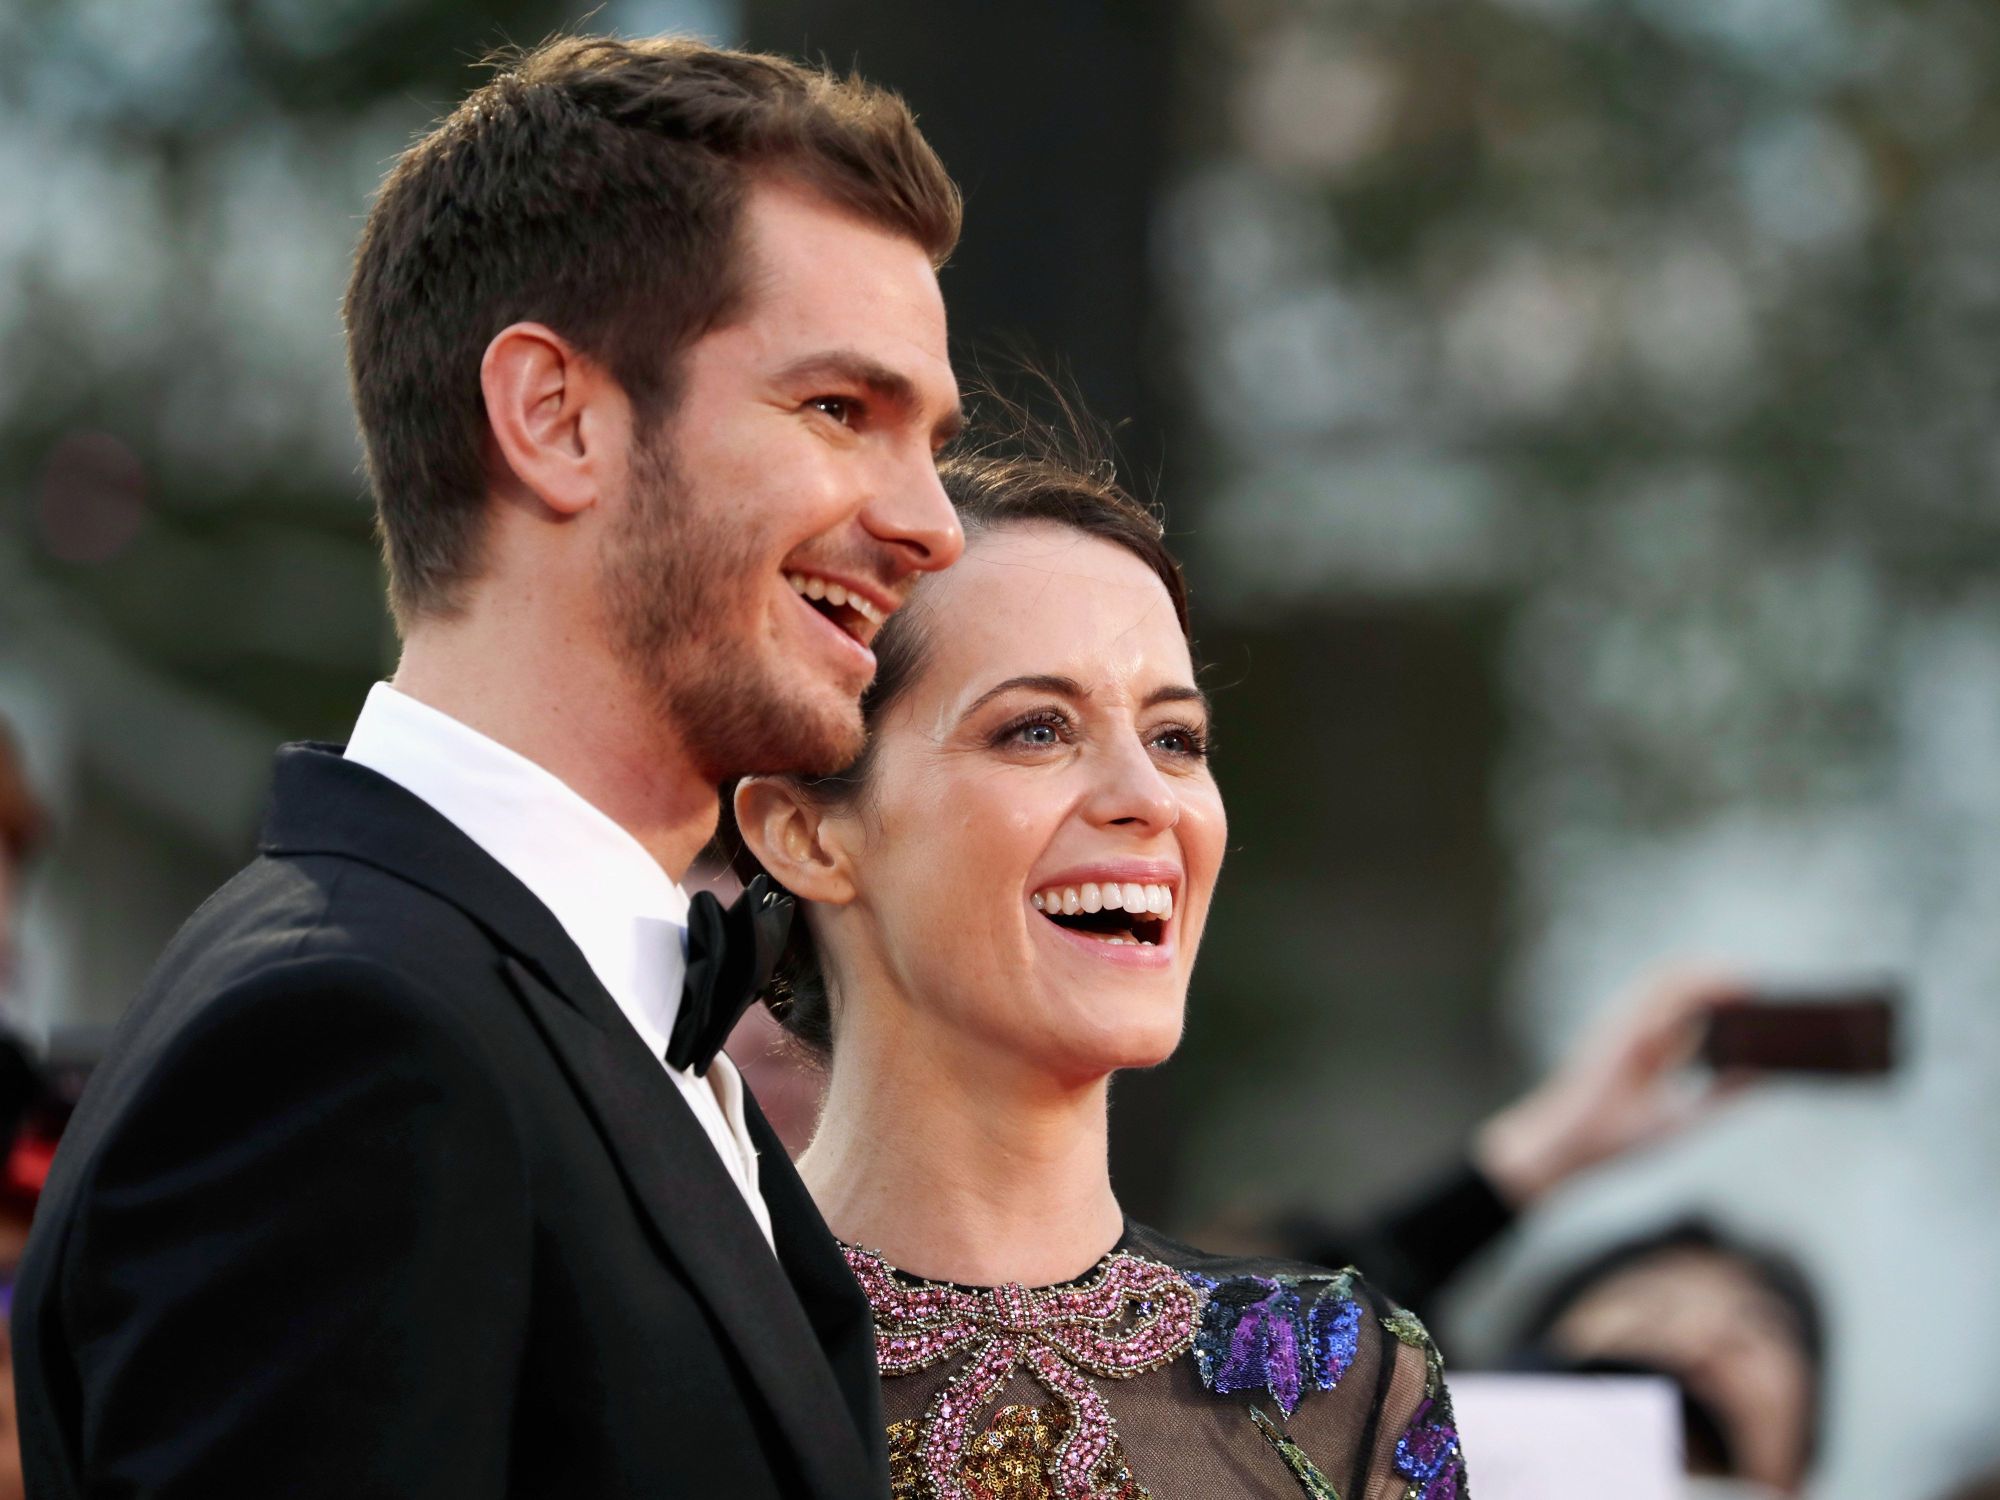 andrew-garfield-and-claire-foy-1508937249.jpg